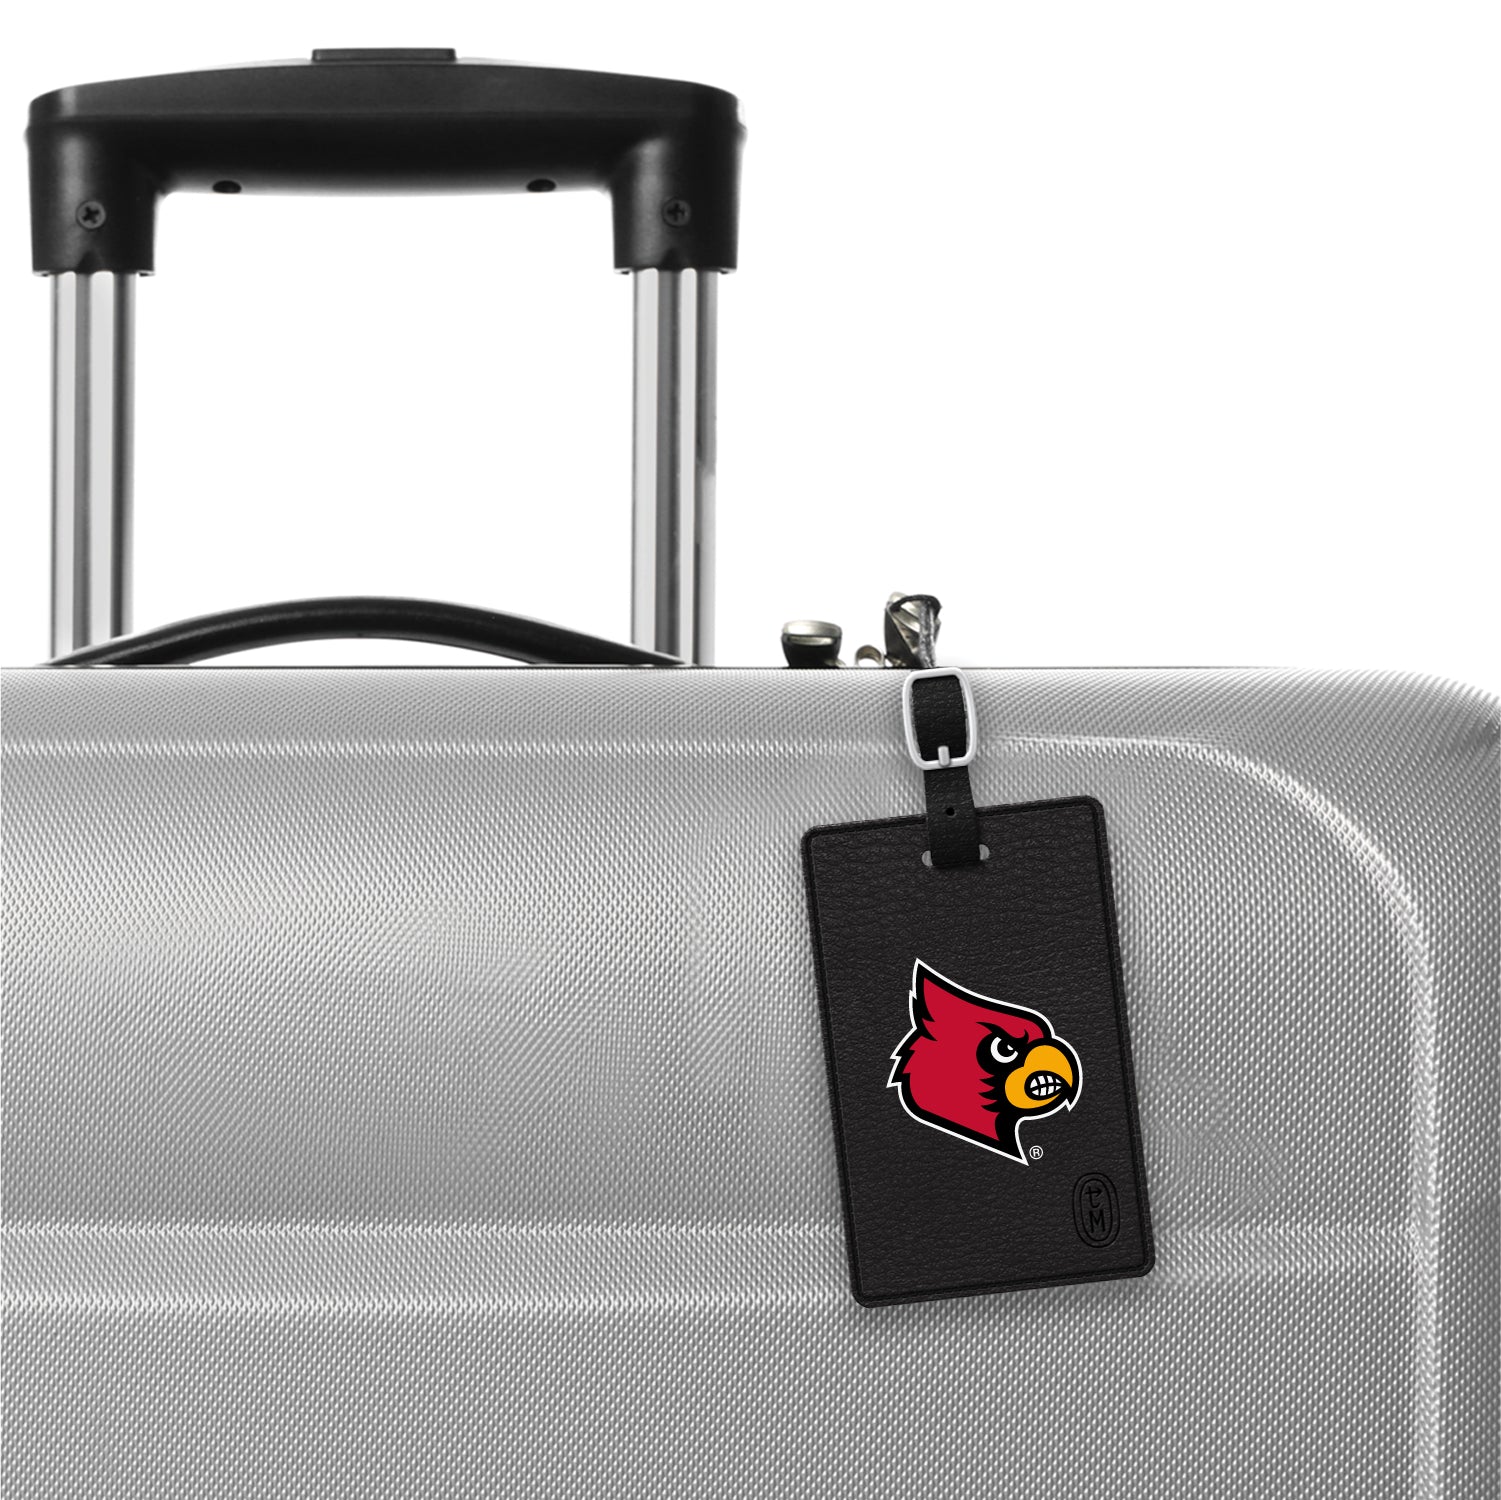 Louisville Cardinals Luggage Tag